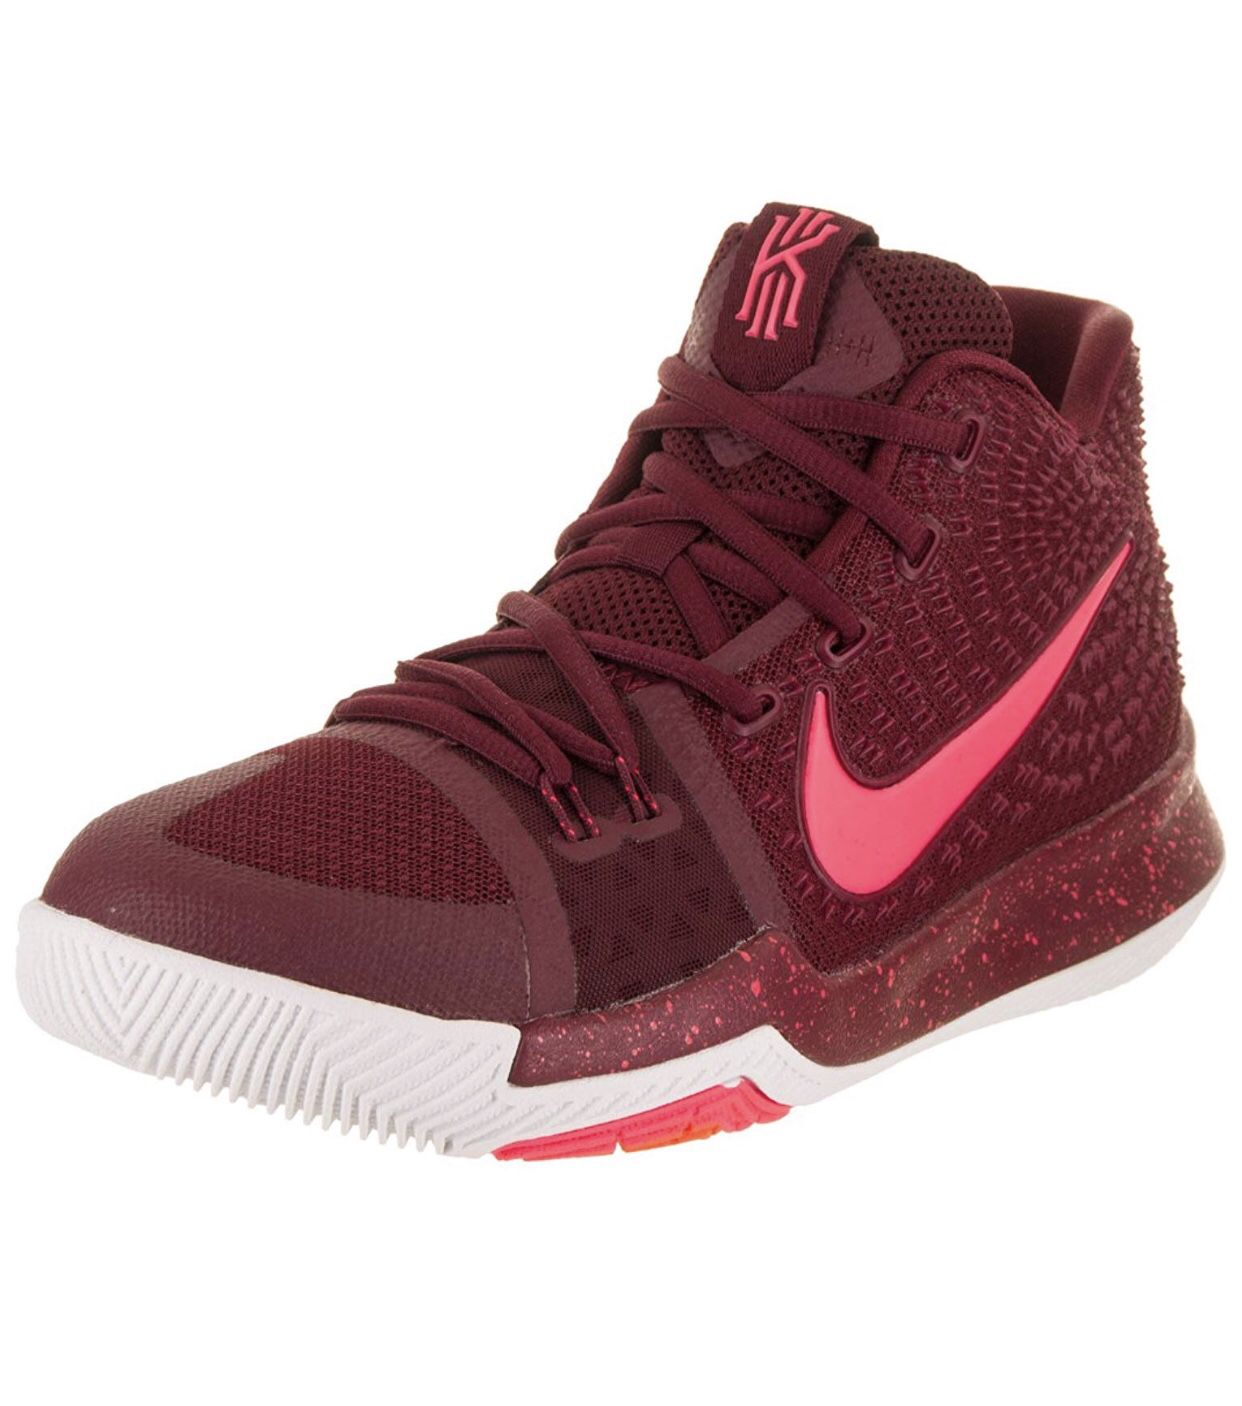 BOYS’ NIKE KYRIE TEAM Red/Hot Punch-White BASKETBALL SHOES! 🏀